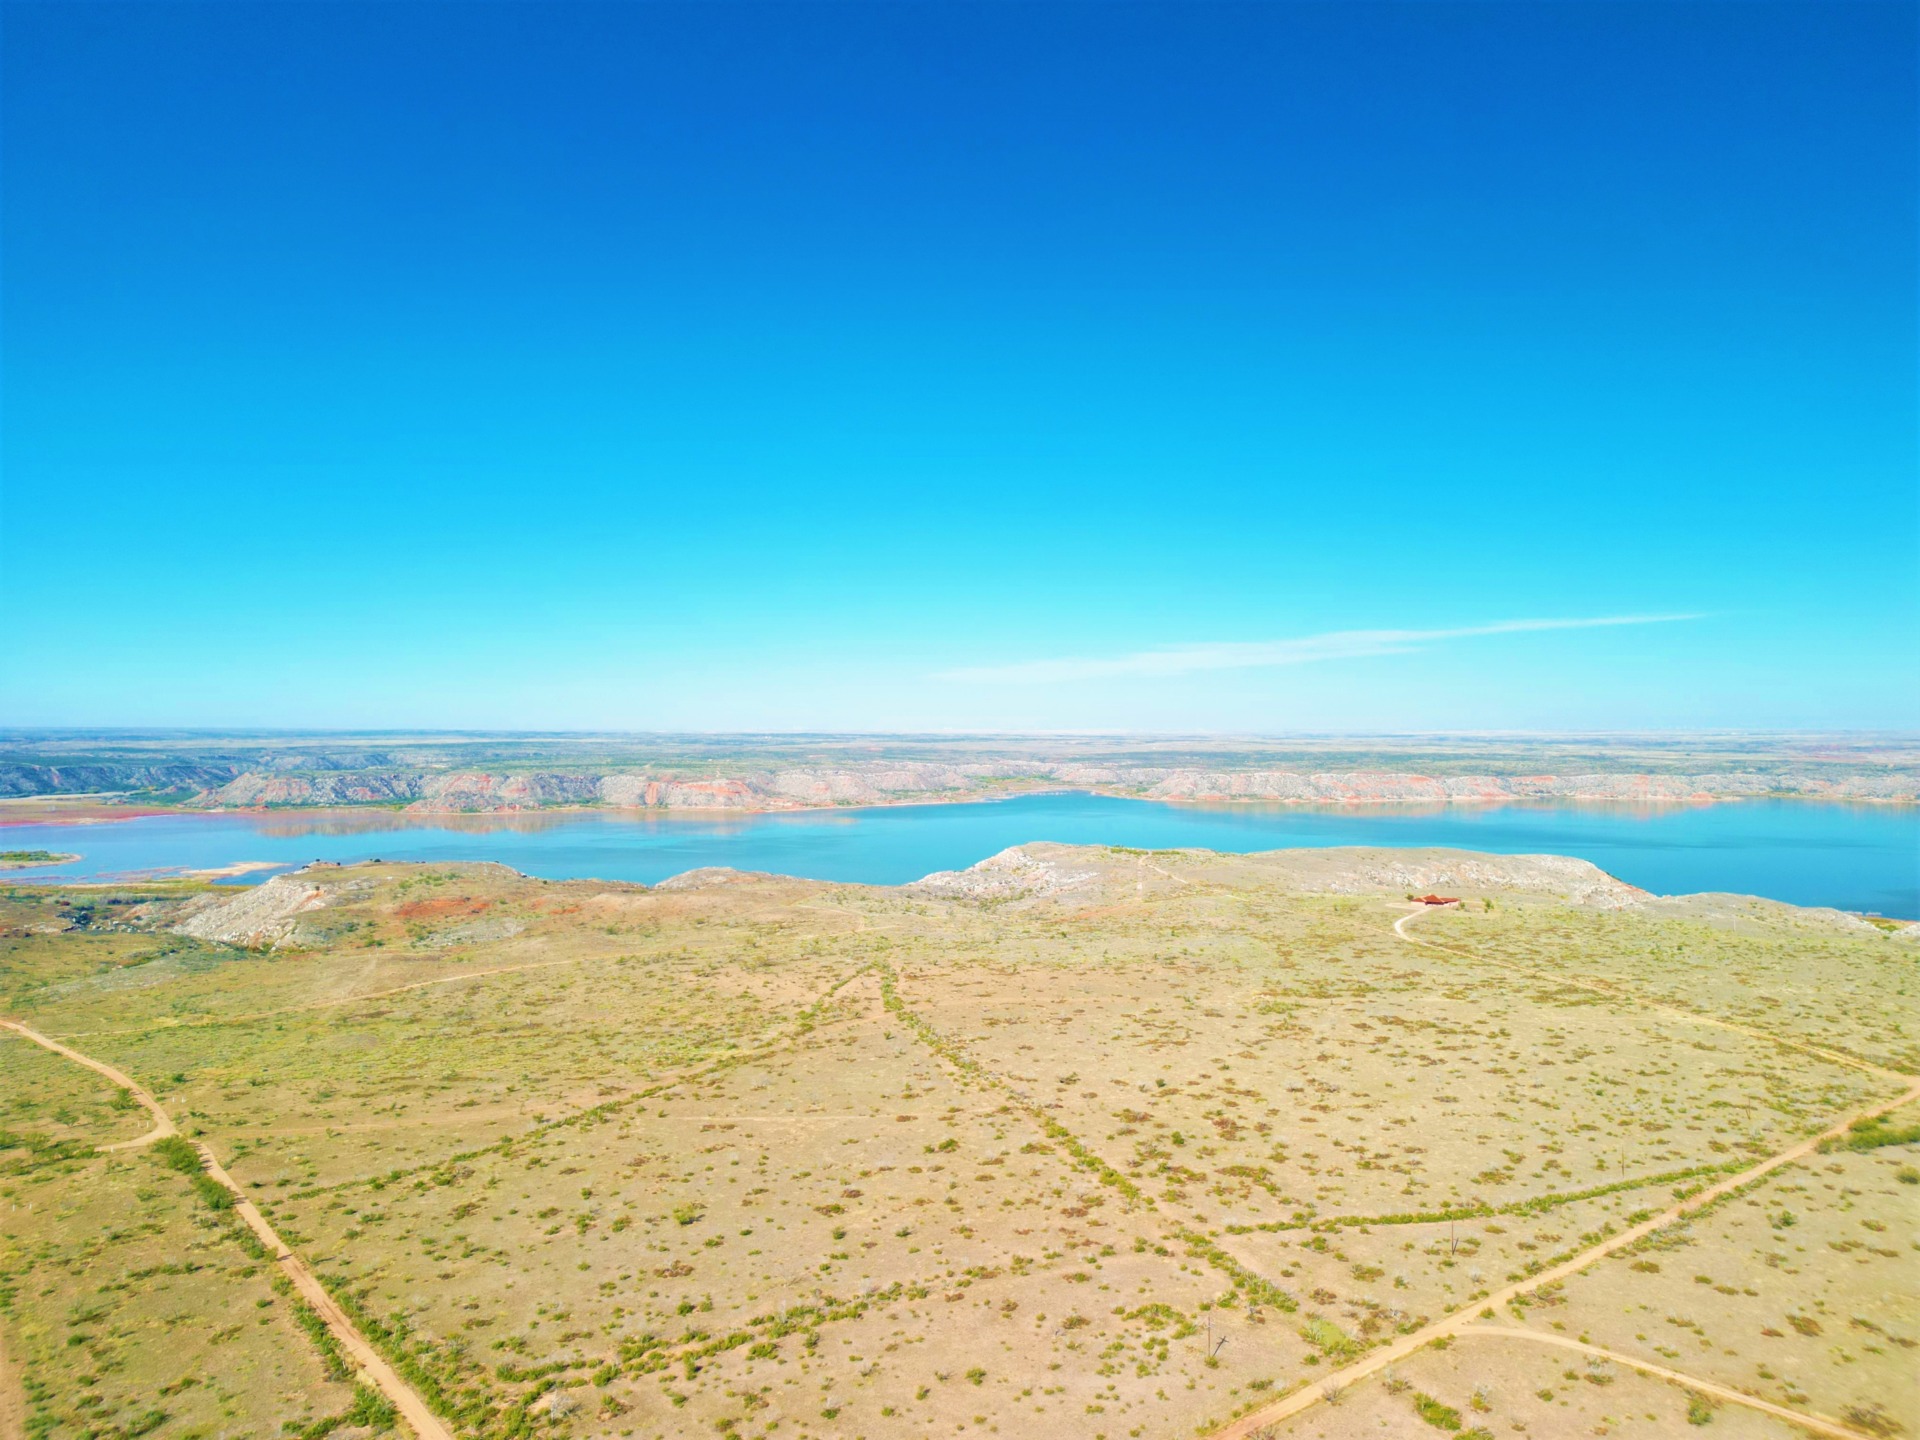 Land for Sale in Moore County 0.09 Acre RV Living Lot with Water & Power Access near Lake Meredith 2